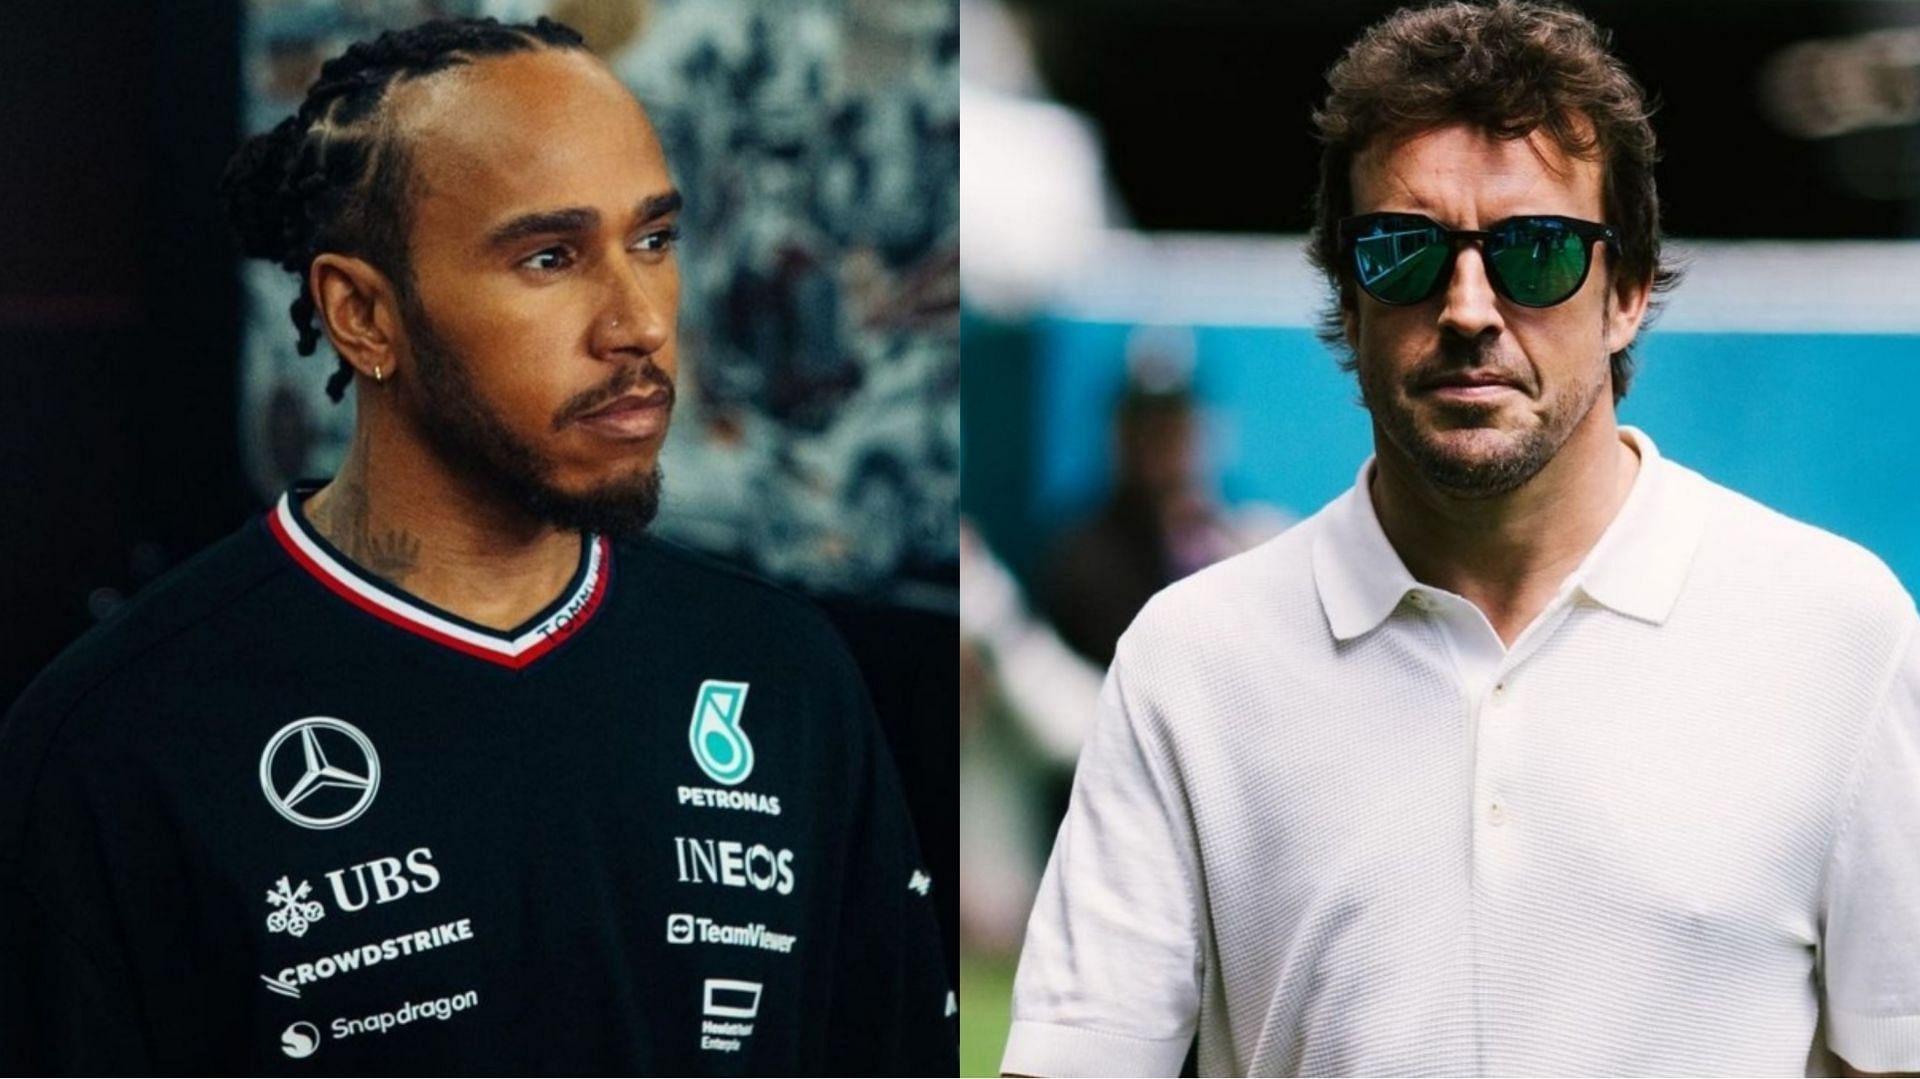 Fernando Alonso takes shot at Lewis Hamilton following Miami Sprint race (Image from Instagram)